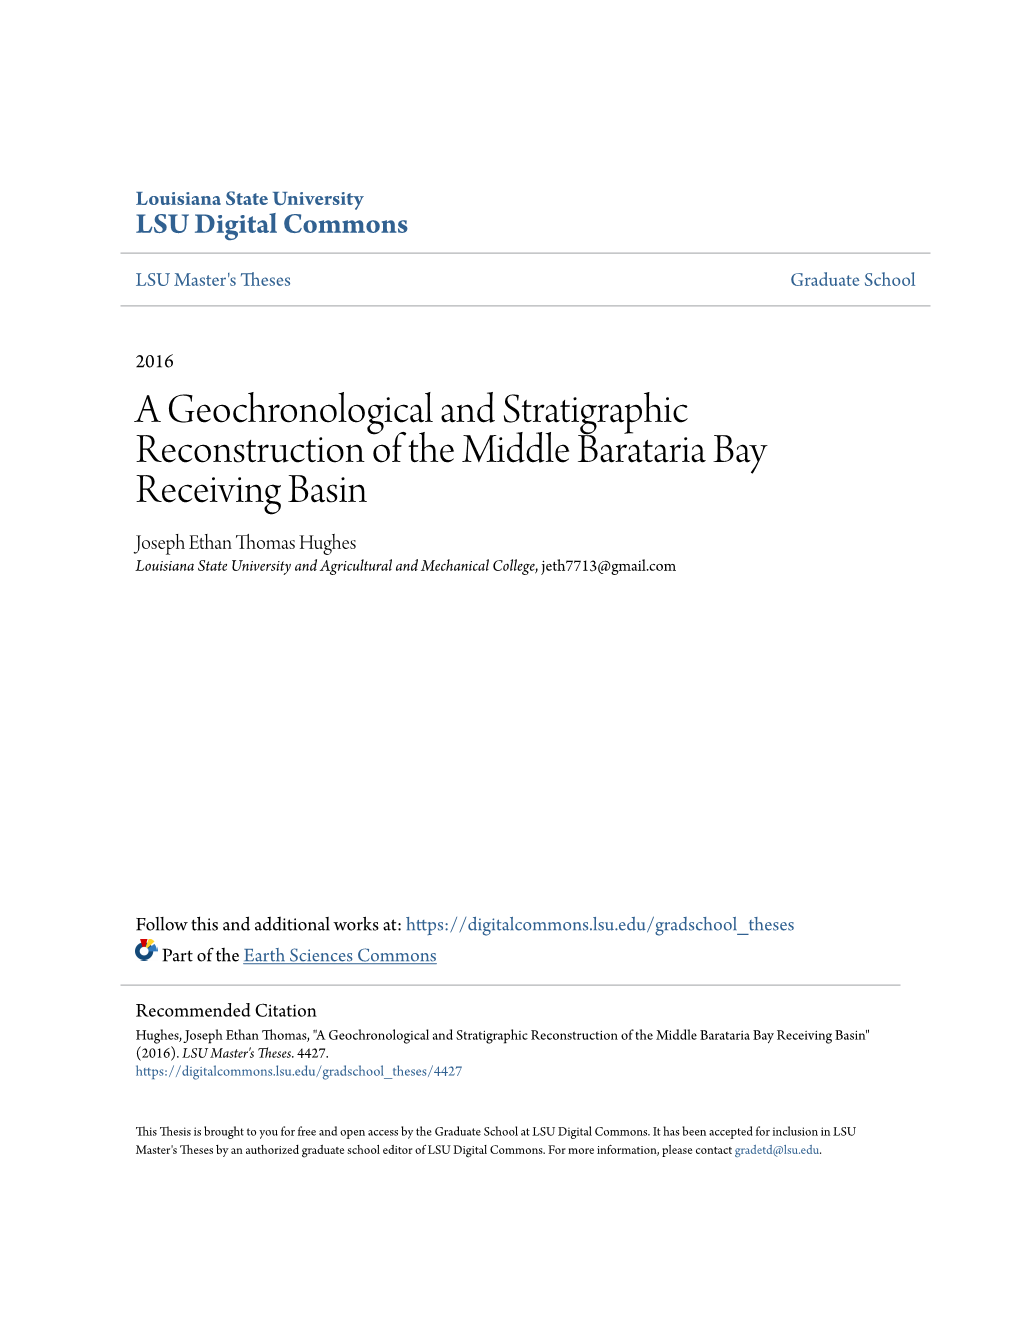 A Geochronological and Stratigraphic Reconstruction of the Middle